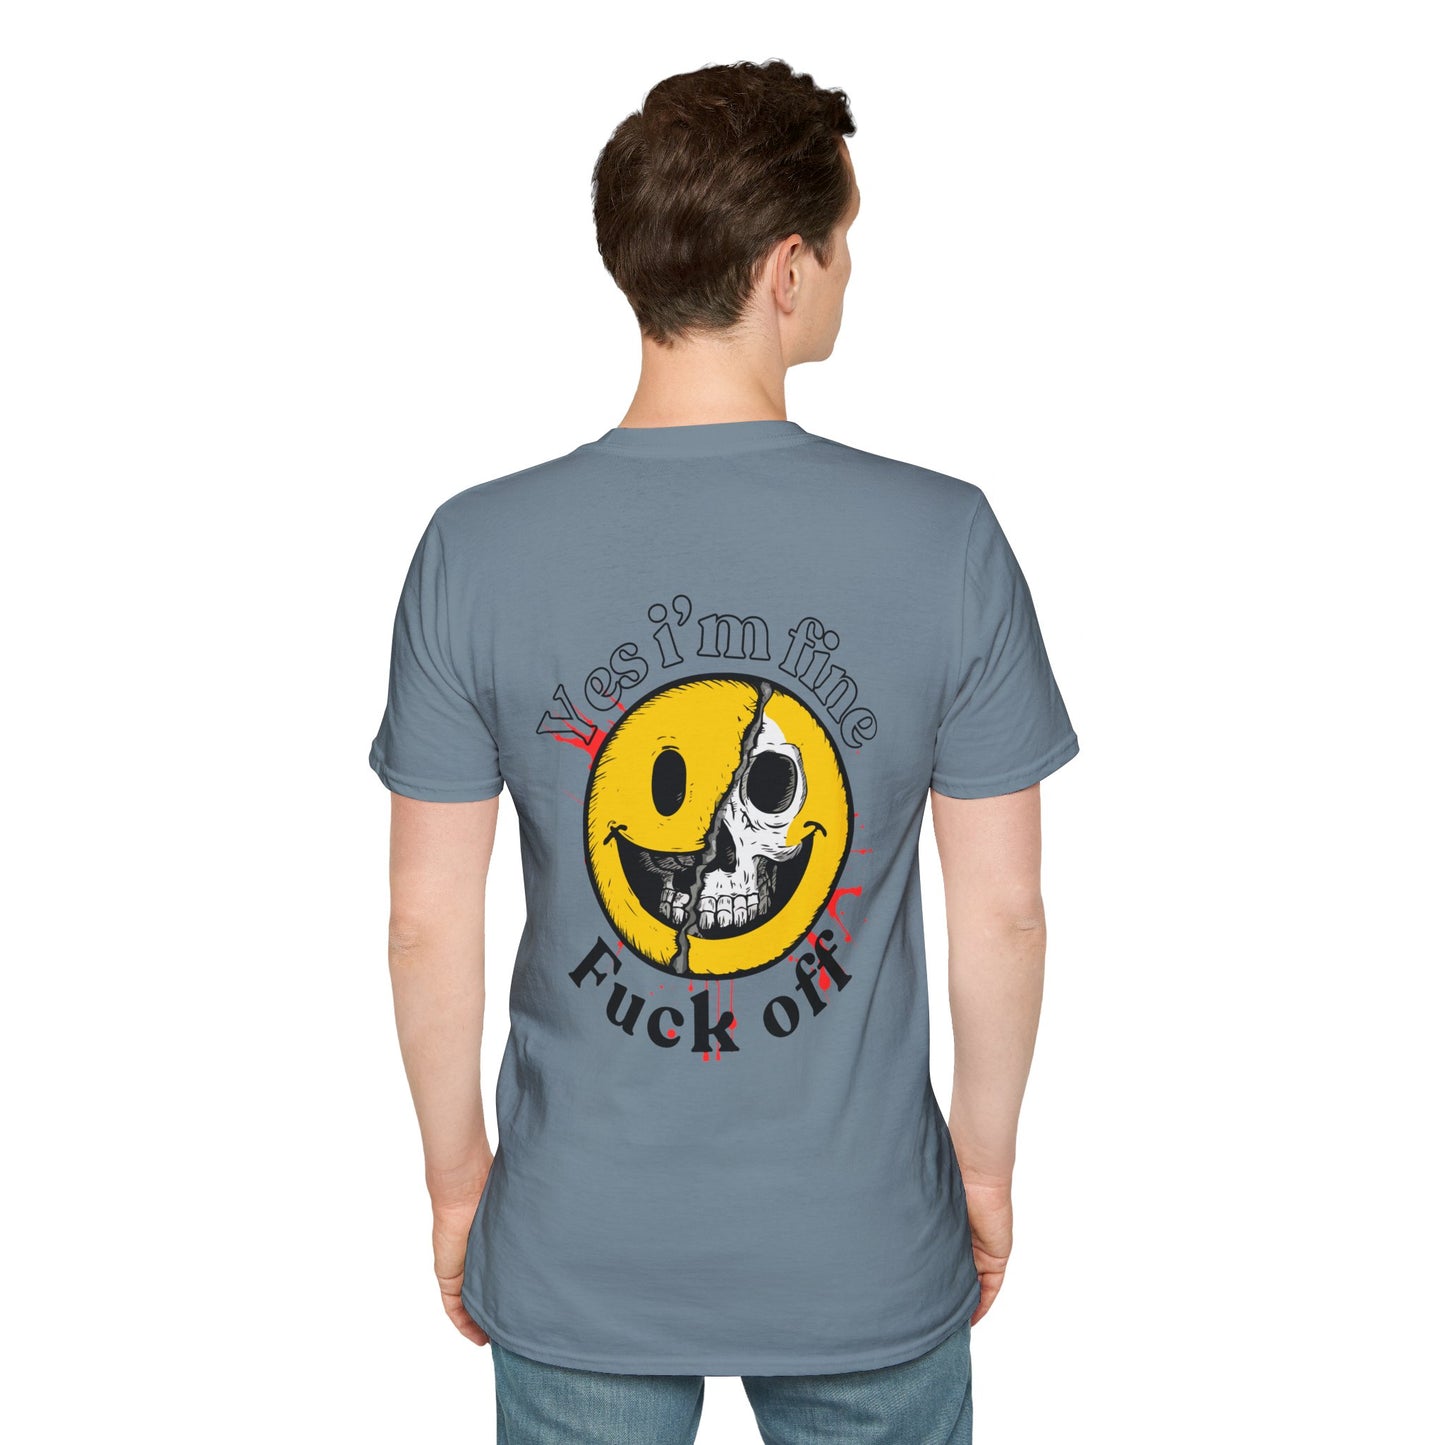 Stone Blue T-shirt with a half smiley, half skull design and bold text 'Yes I'm Fine' and 'Fuck Off' 